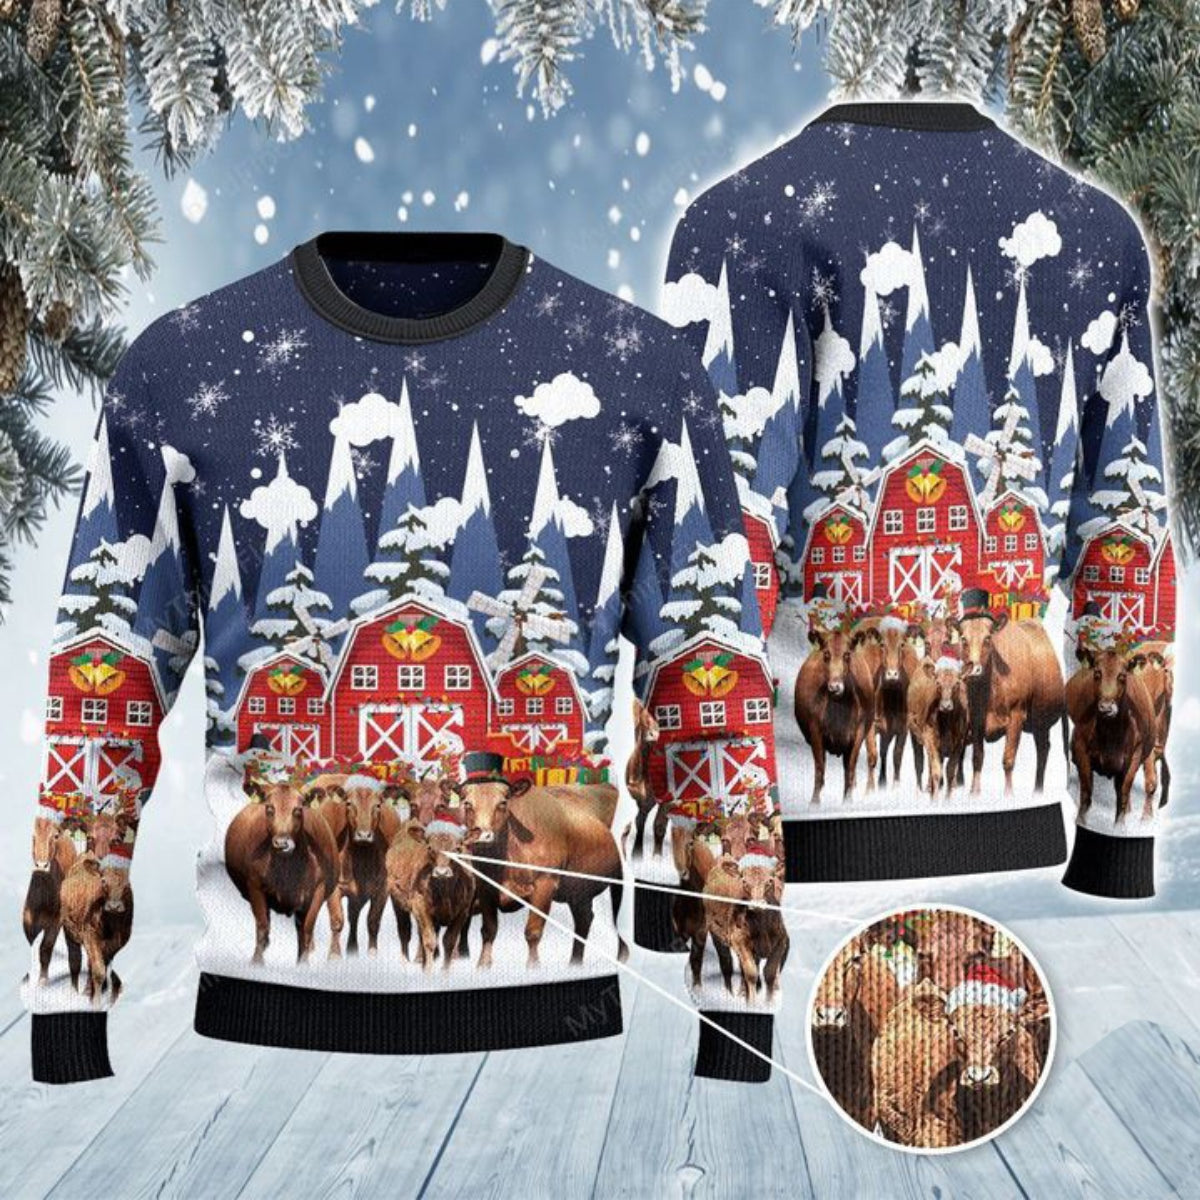 Angus Cattle Red Barn Farm Ugly Christmas Sweater, Perfect Gift and Outfit For Farmers on Christmas, Winter, New Year